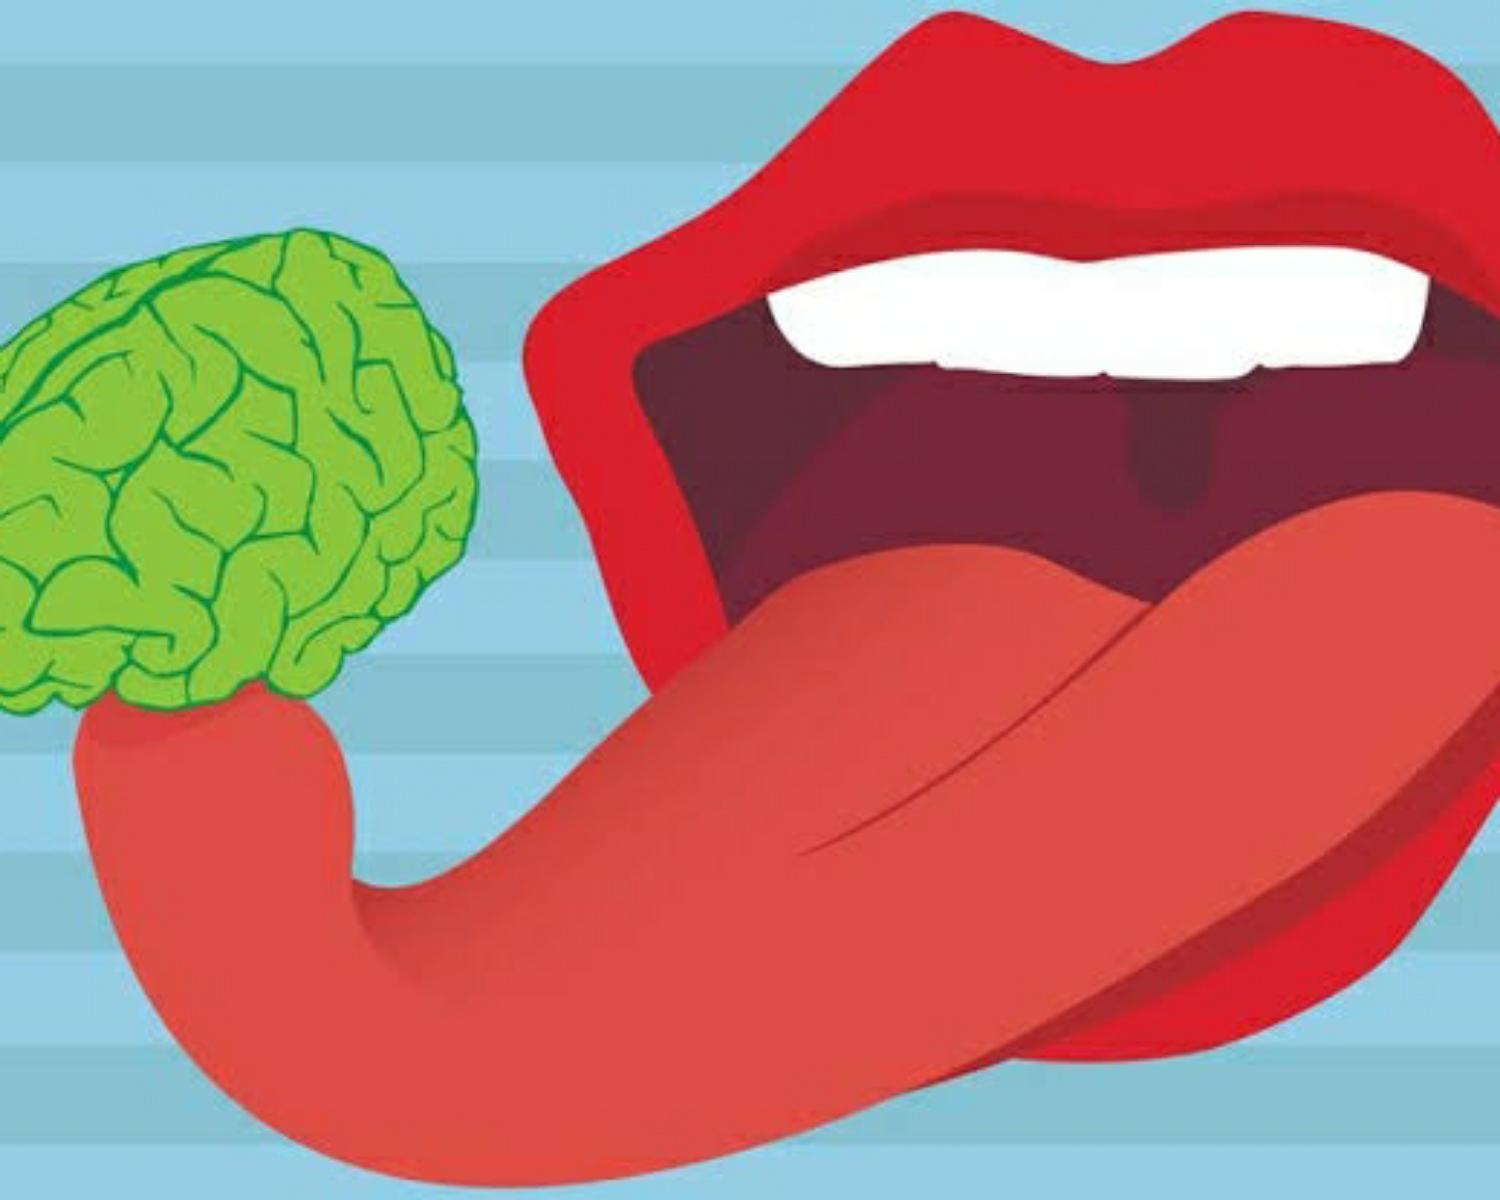 Tip of the tongue syndrome